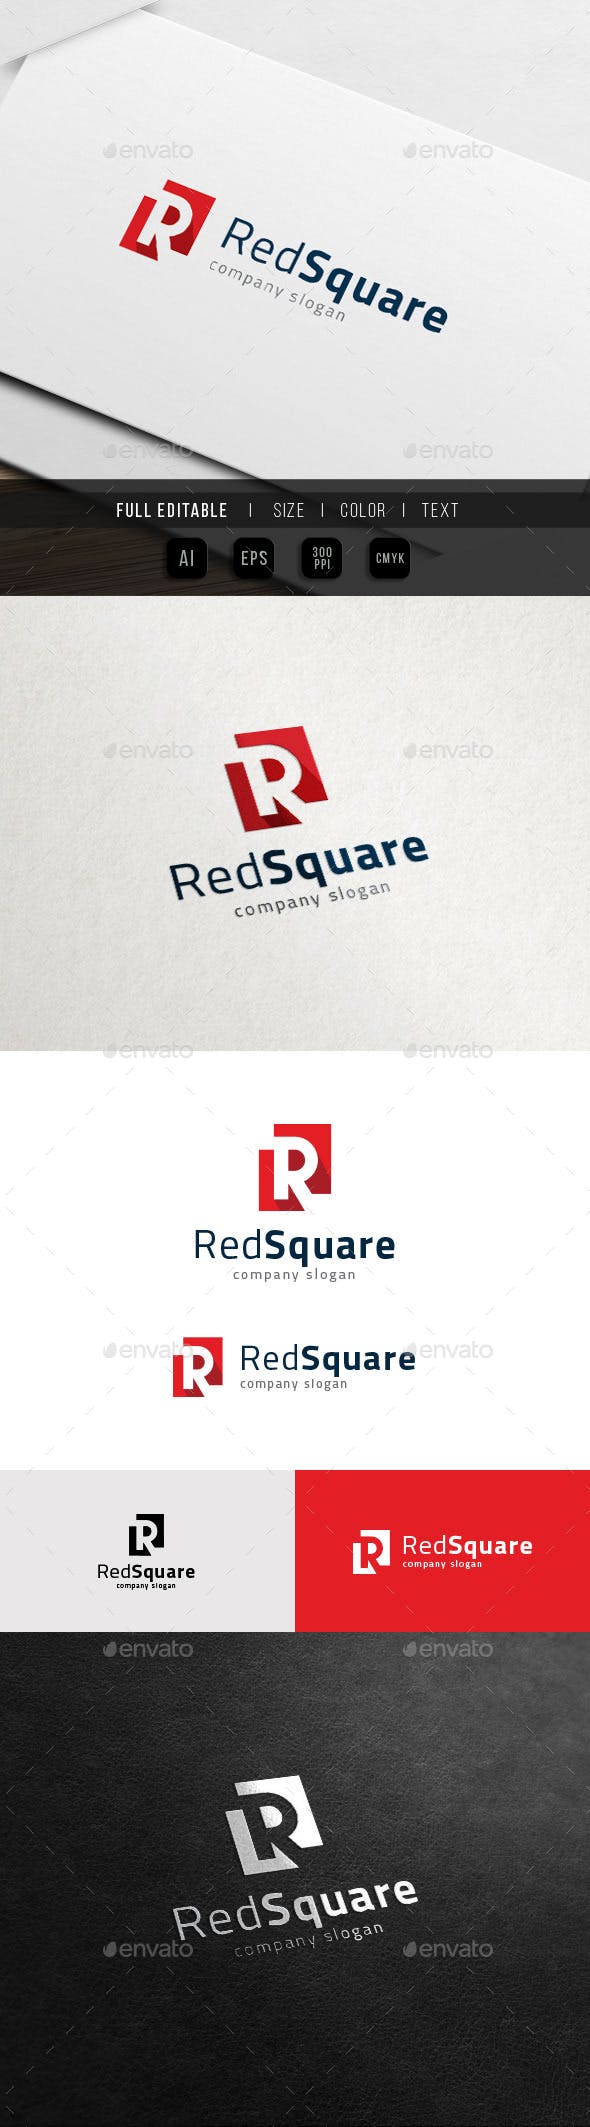 Red Square Company Logo - R Logo - Red Square - Real Estate by yip87 | GraphicRiver